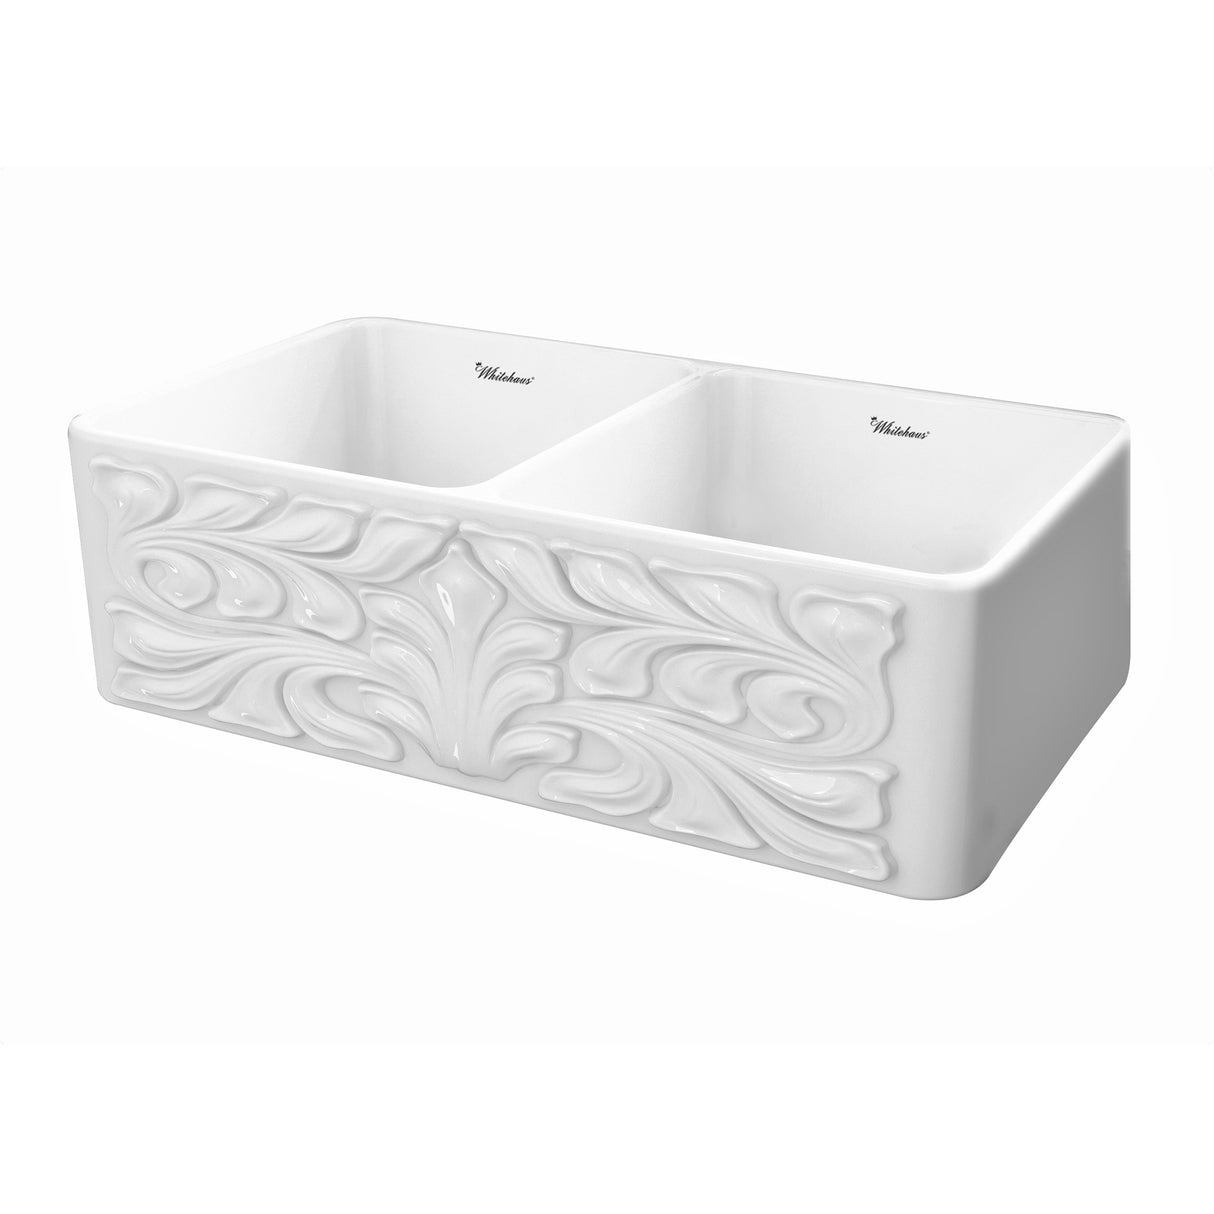 Farmhaus Fireclay Reversible Double Bowl Sink with a Gothichaus Swirl Design Front Apron on One Side, and a Fluted Front Apron on the Opposite Side.